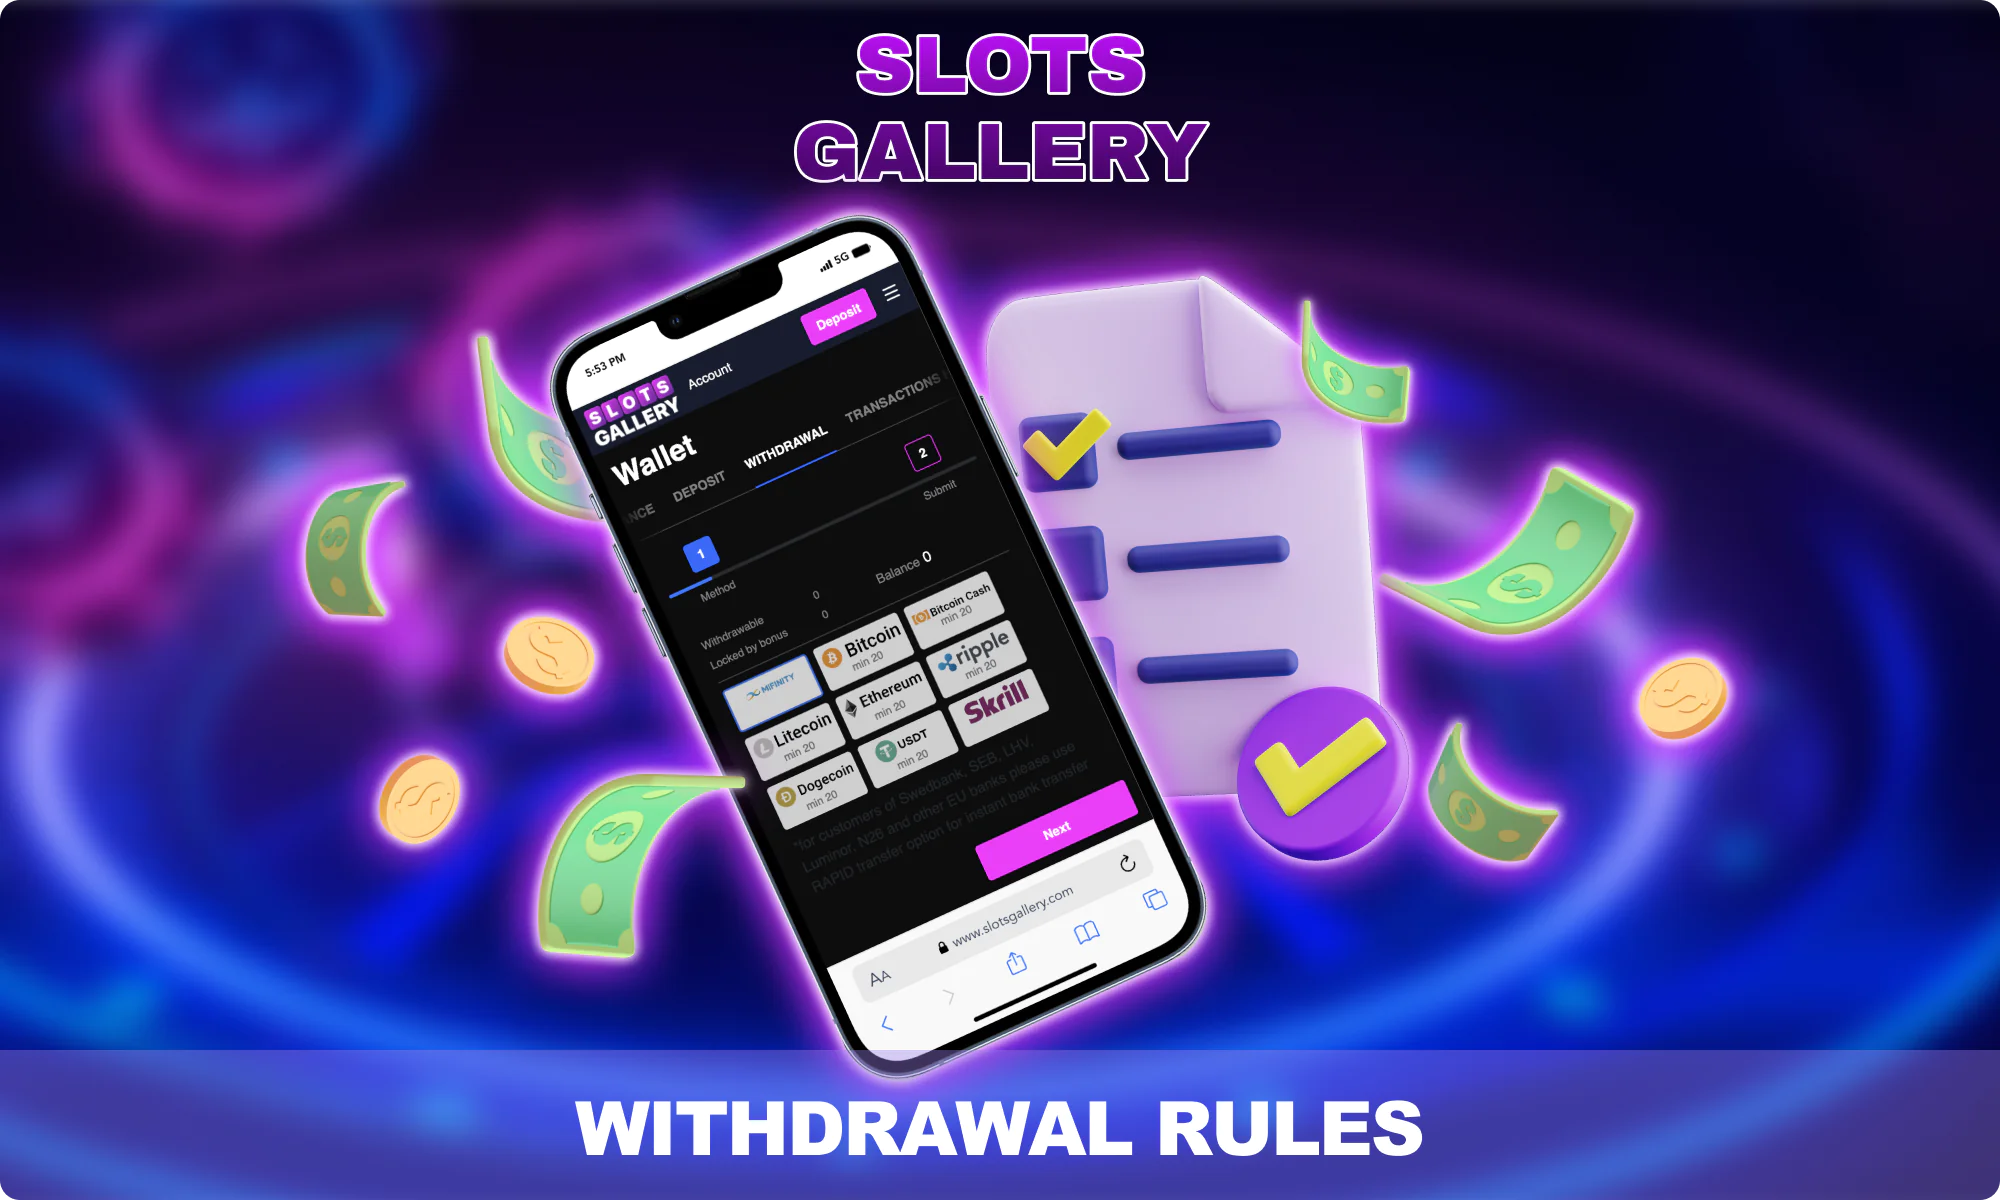 Slots Gallery - withdrawal rules for Canadian players